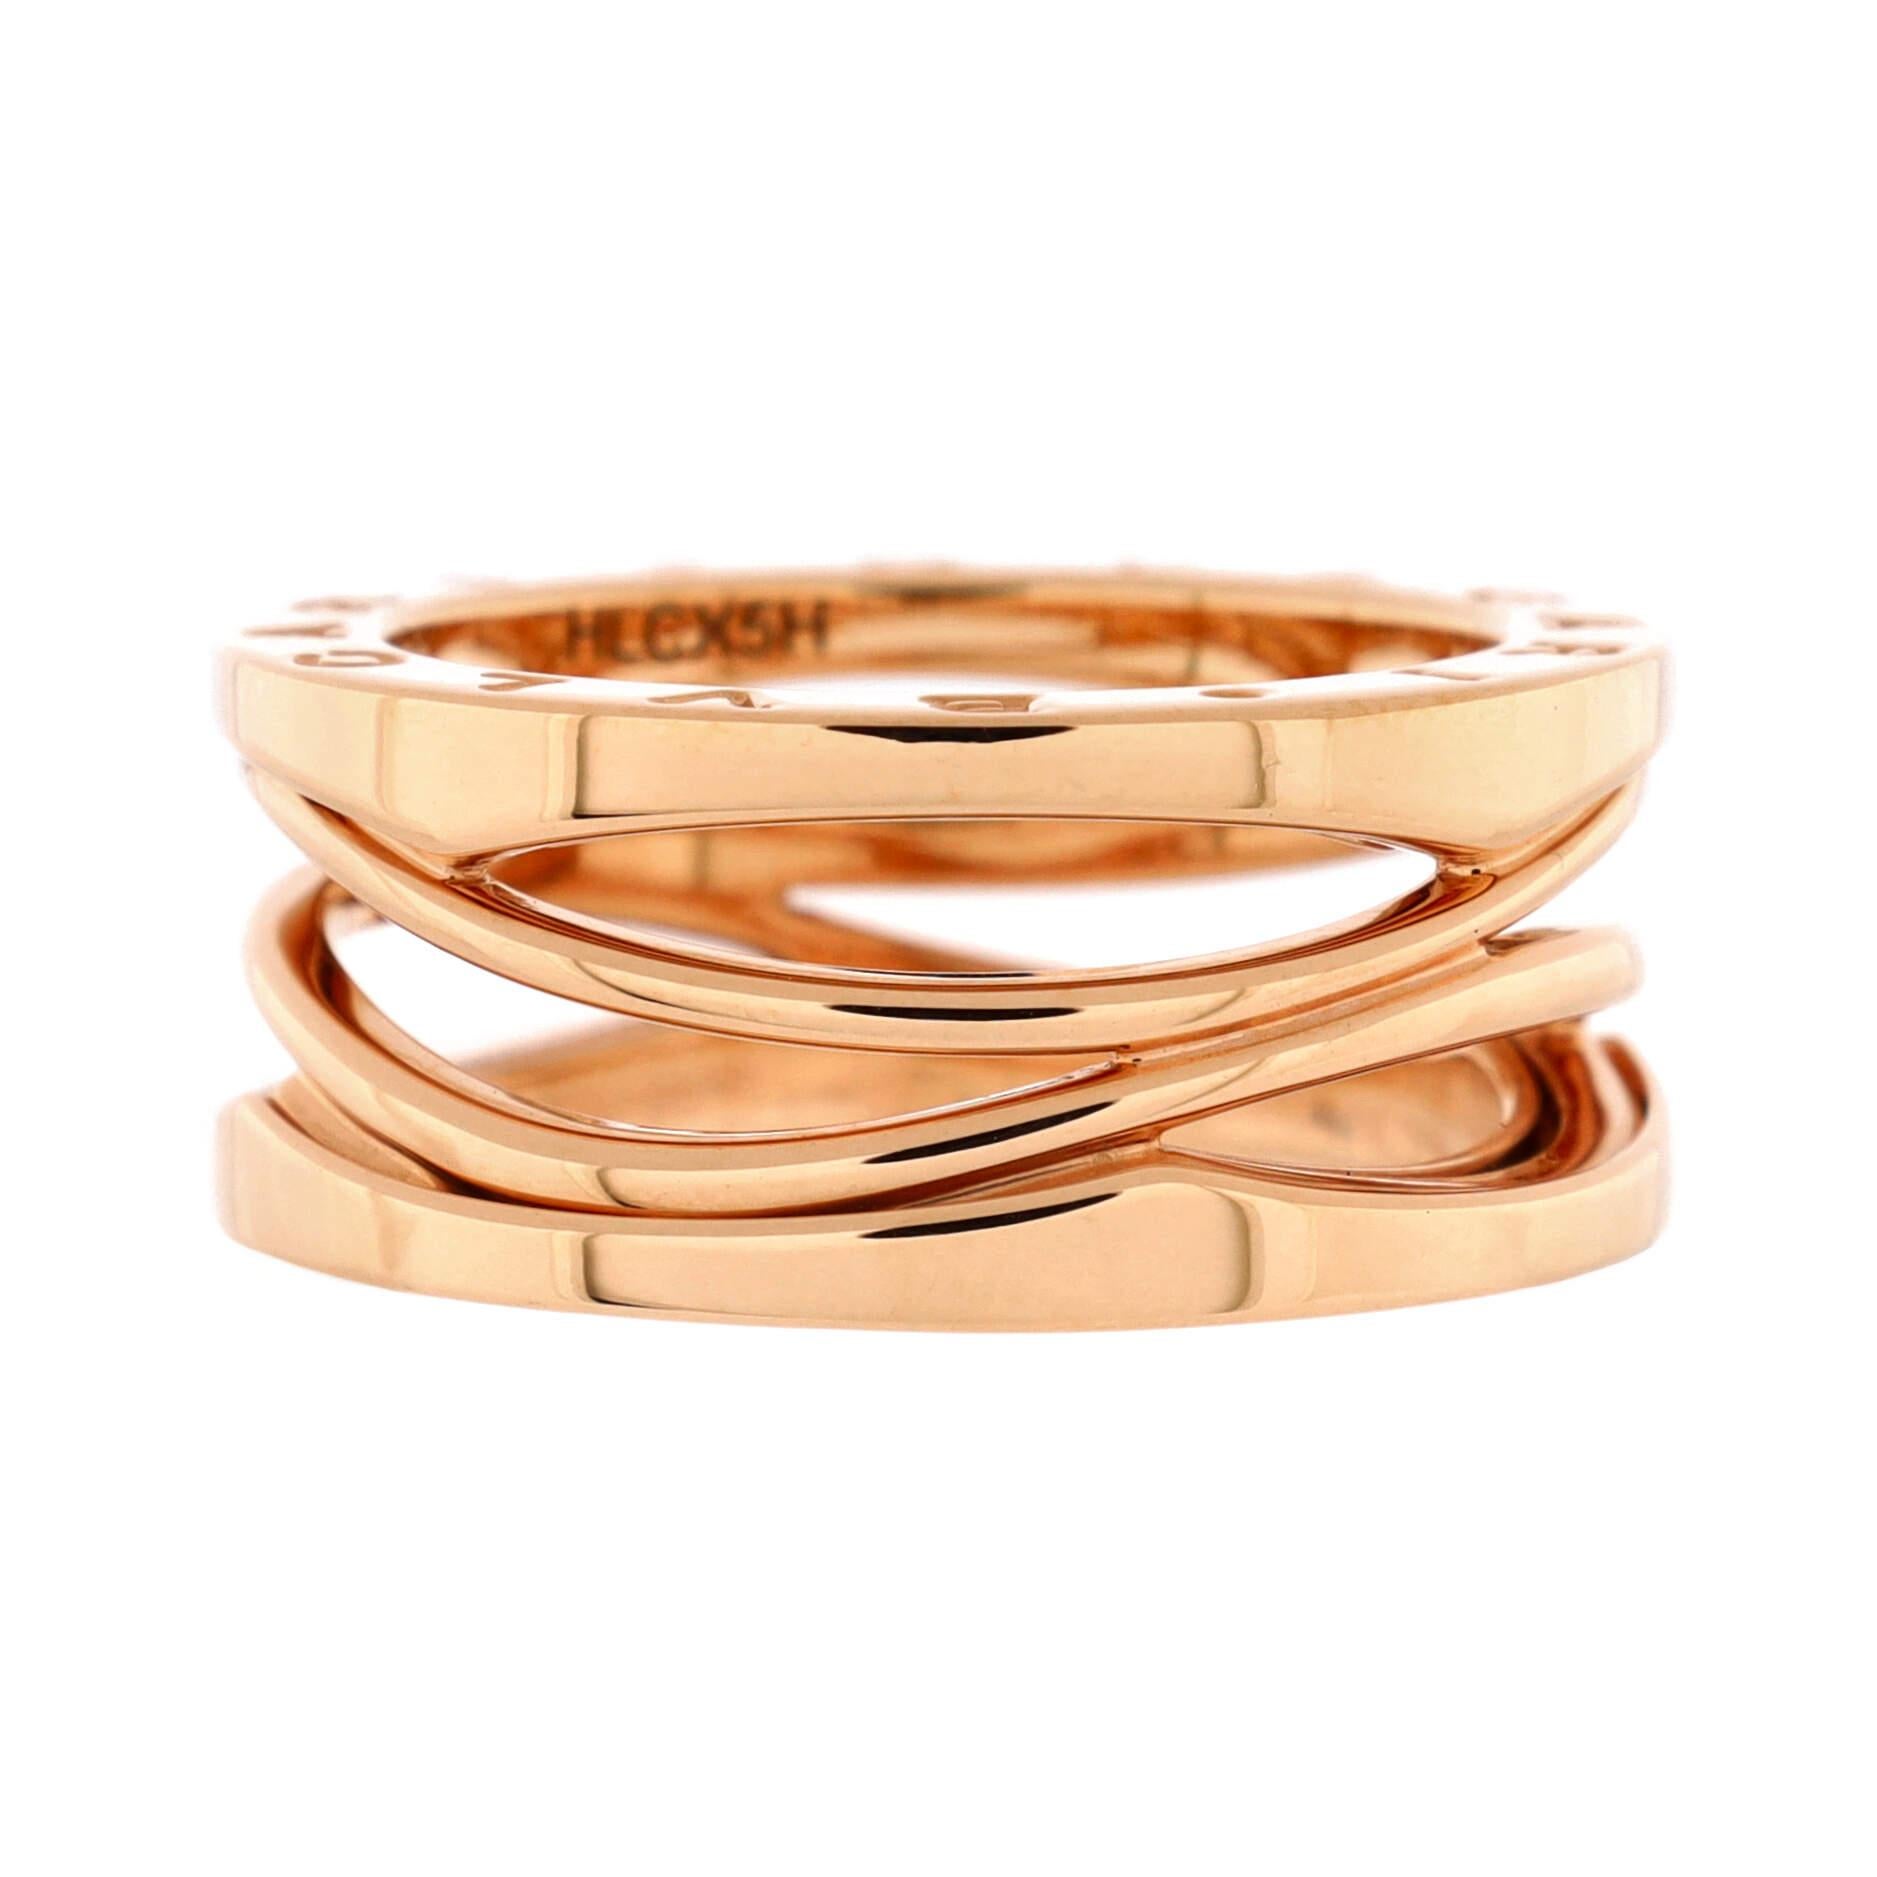 Condition: Great. Minor wear throughout.
Accessories: No Accessories
Measurements: Size: 7.25 - 55, Width: 9.55 mm
Designer: Bvlgari
Model: B.Zero1 Design Legend Zaha Hadid Four Band Ring 18K Rose Gold
Exterior Color: Rose Gold
Item Number: